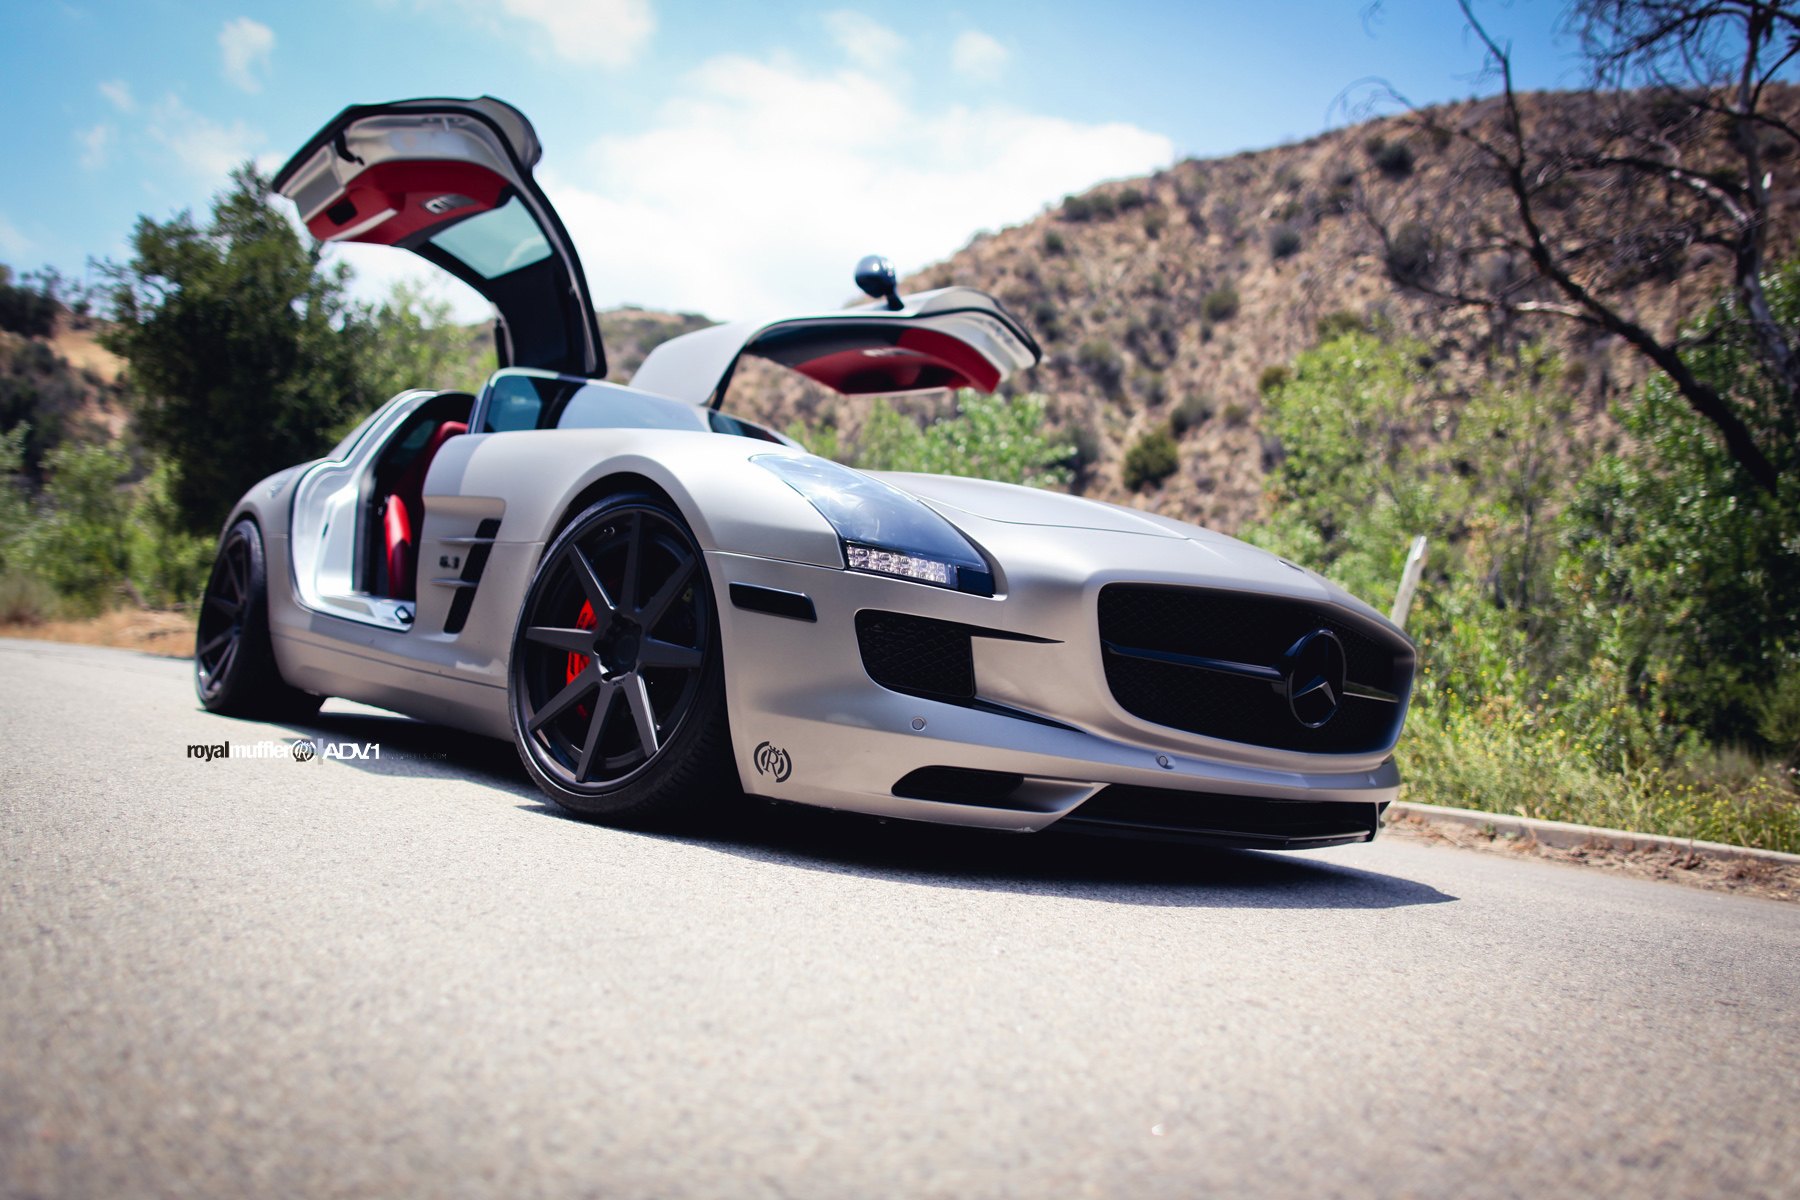 Vertical Doors on Silver Mercedes SLS - Photo by ADV.1